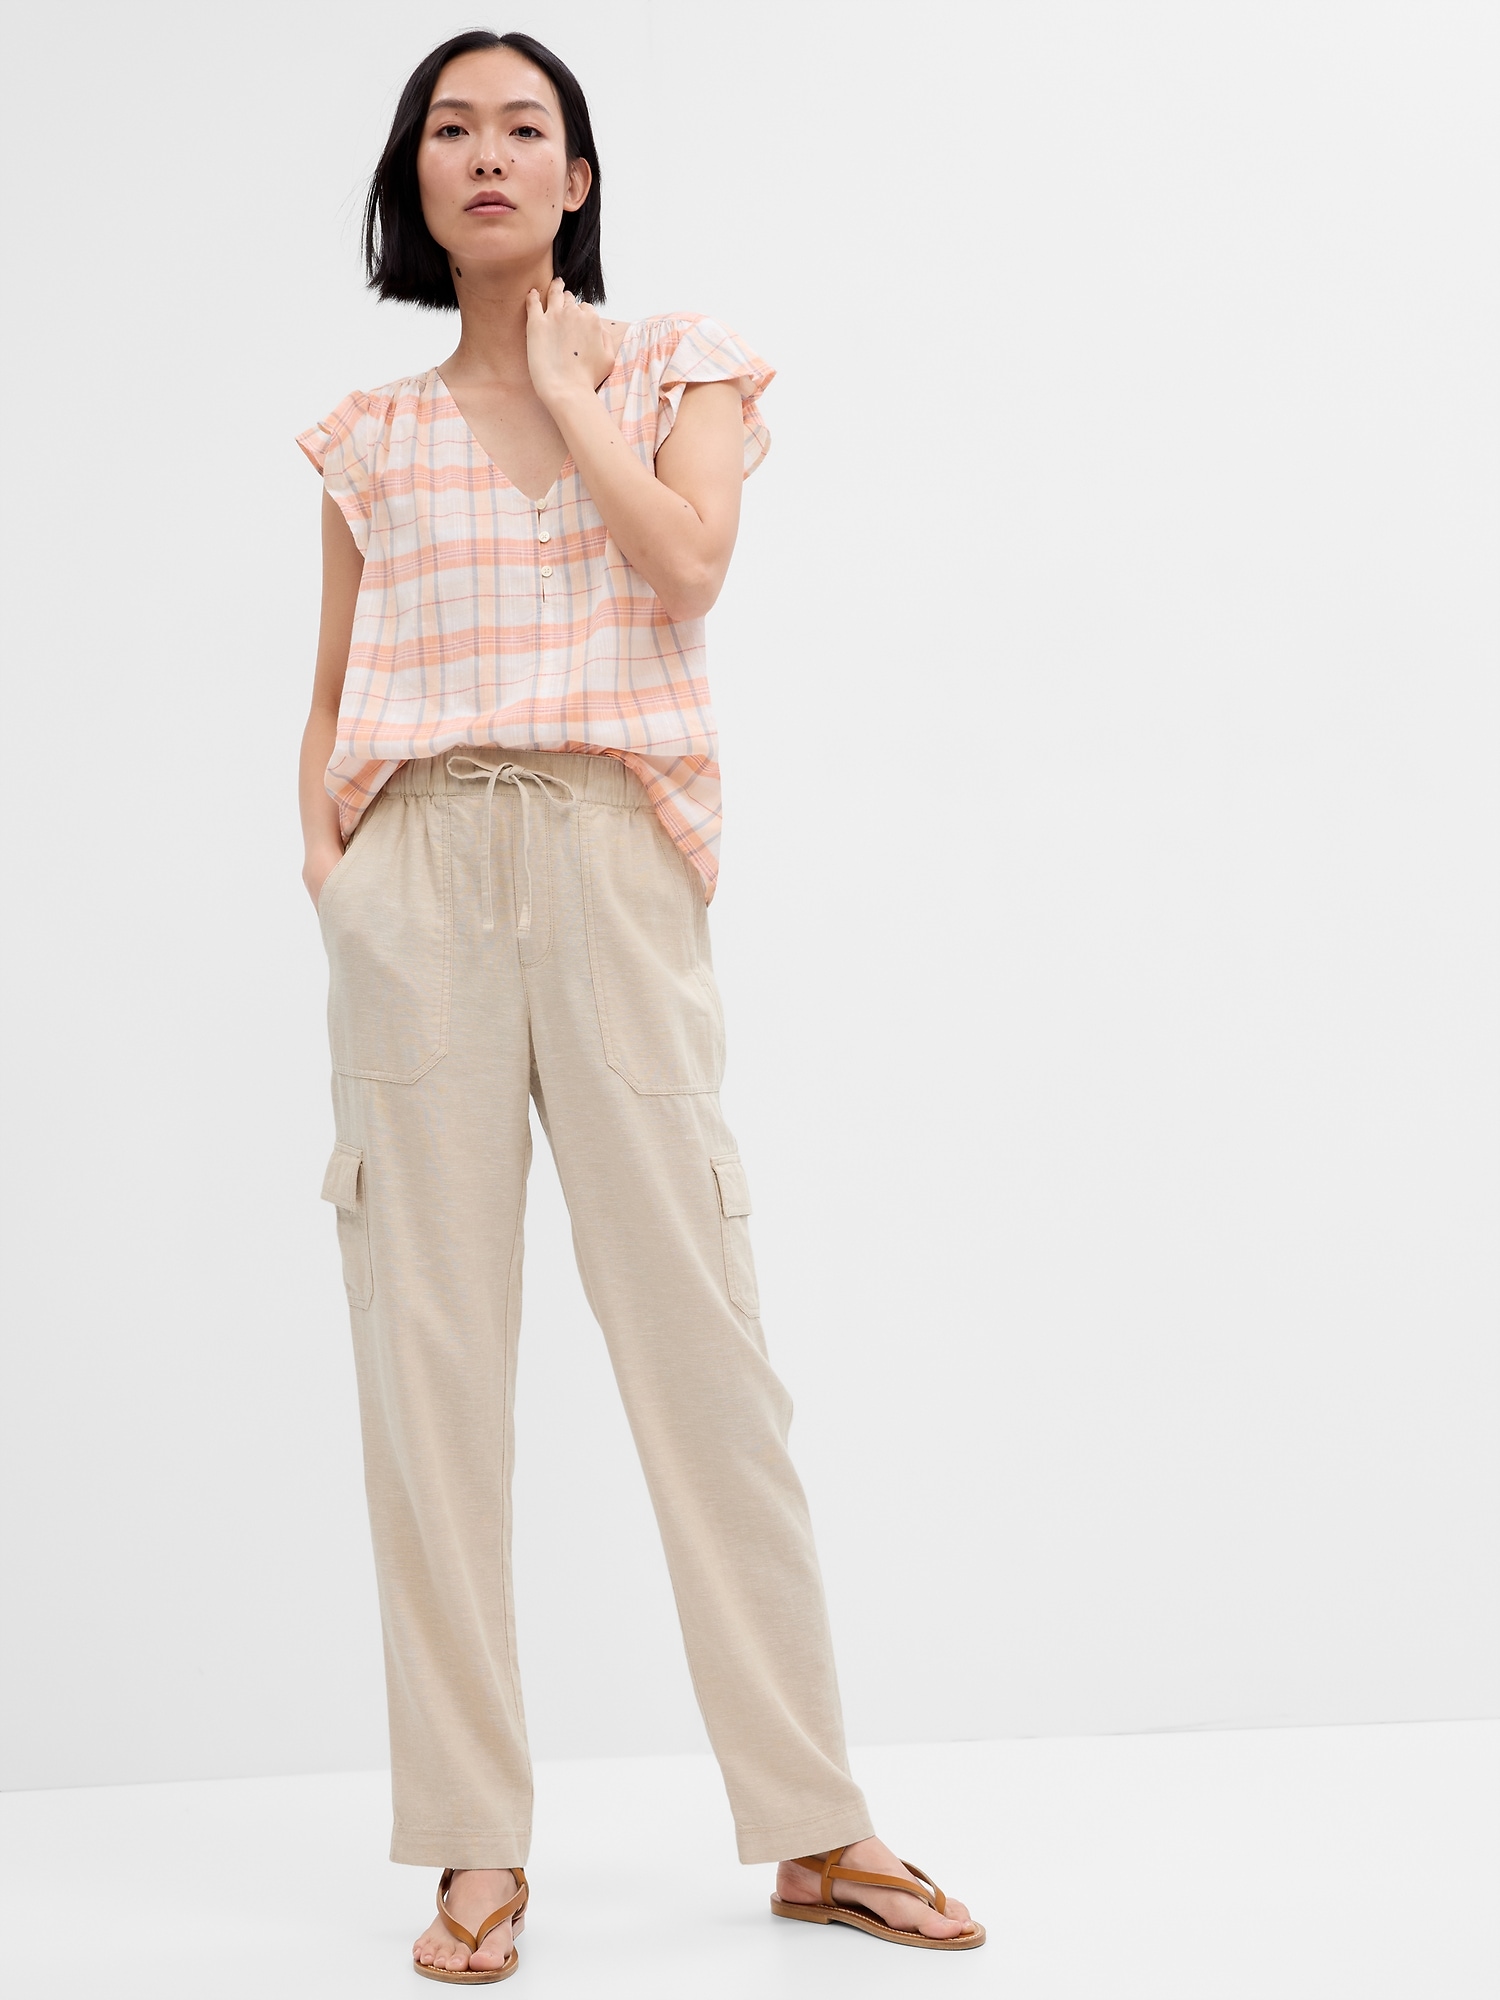 SELONE Linen Pants for Women Petite Drawstring With Pockets Plus Size Baggy  Elastic Waist Casual Long Pant Fashion Solid Loose Pants for Everyday Wear  Running Work Casual Event Khaki M - Walmart.com